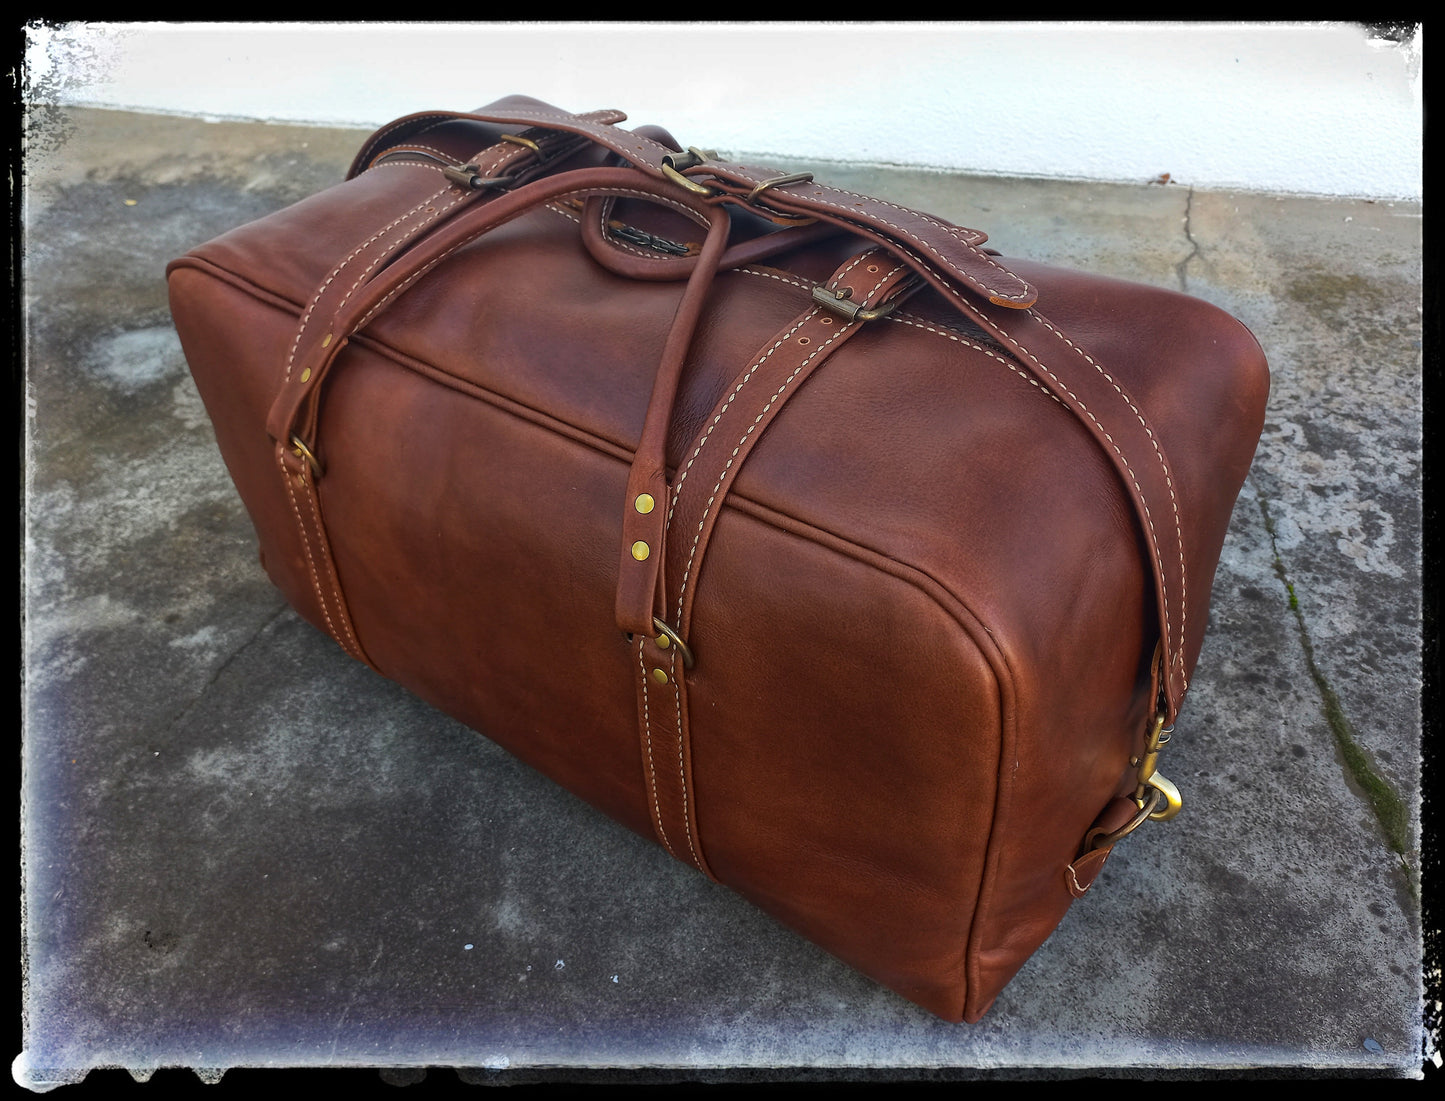 The William Hand Luggage Bag